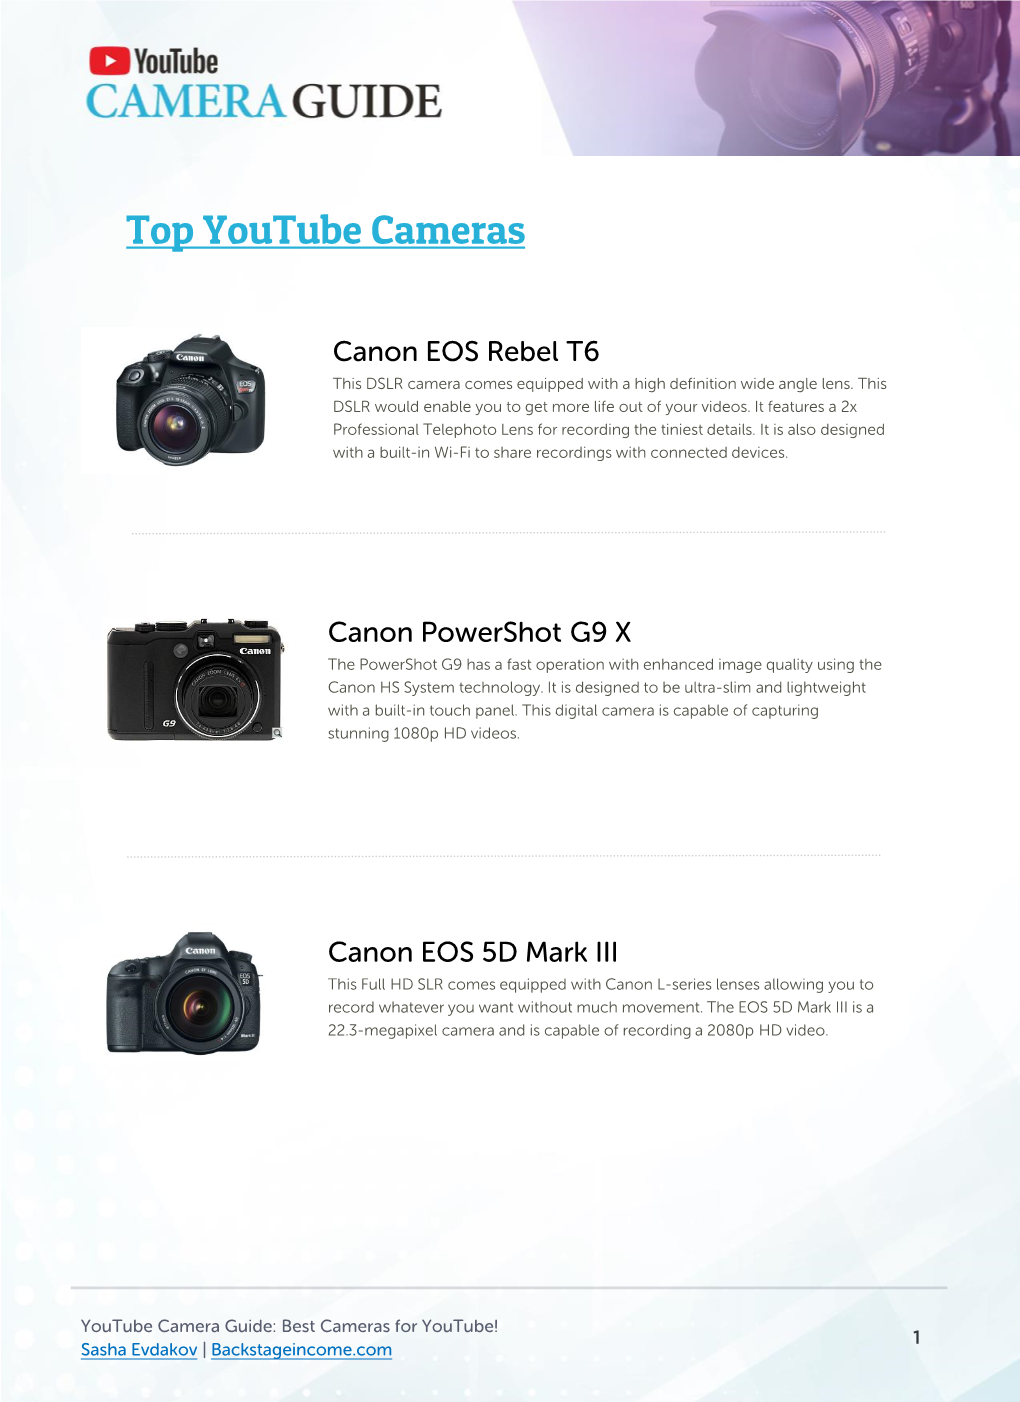 Youtube Camera Guide for Youtuber